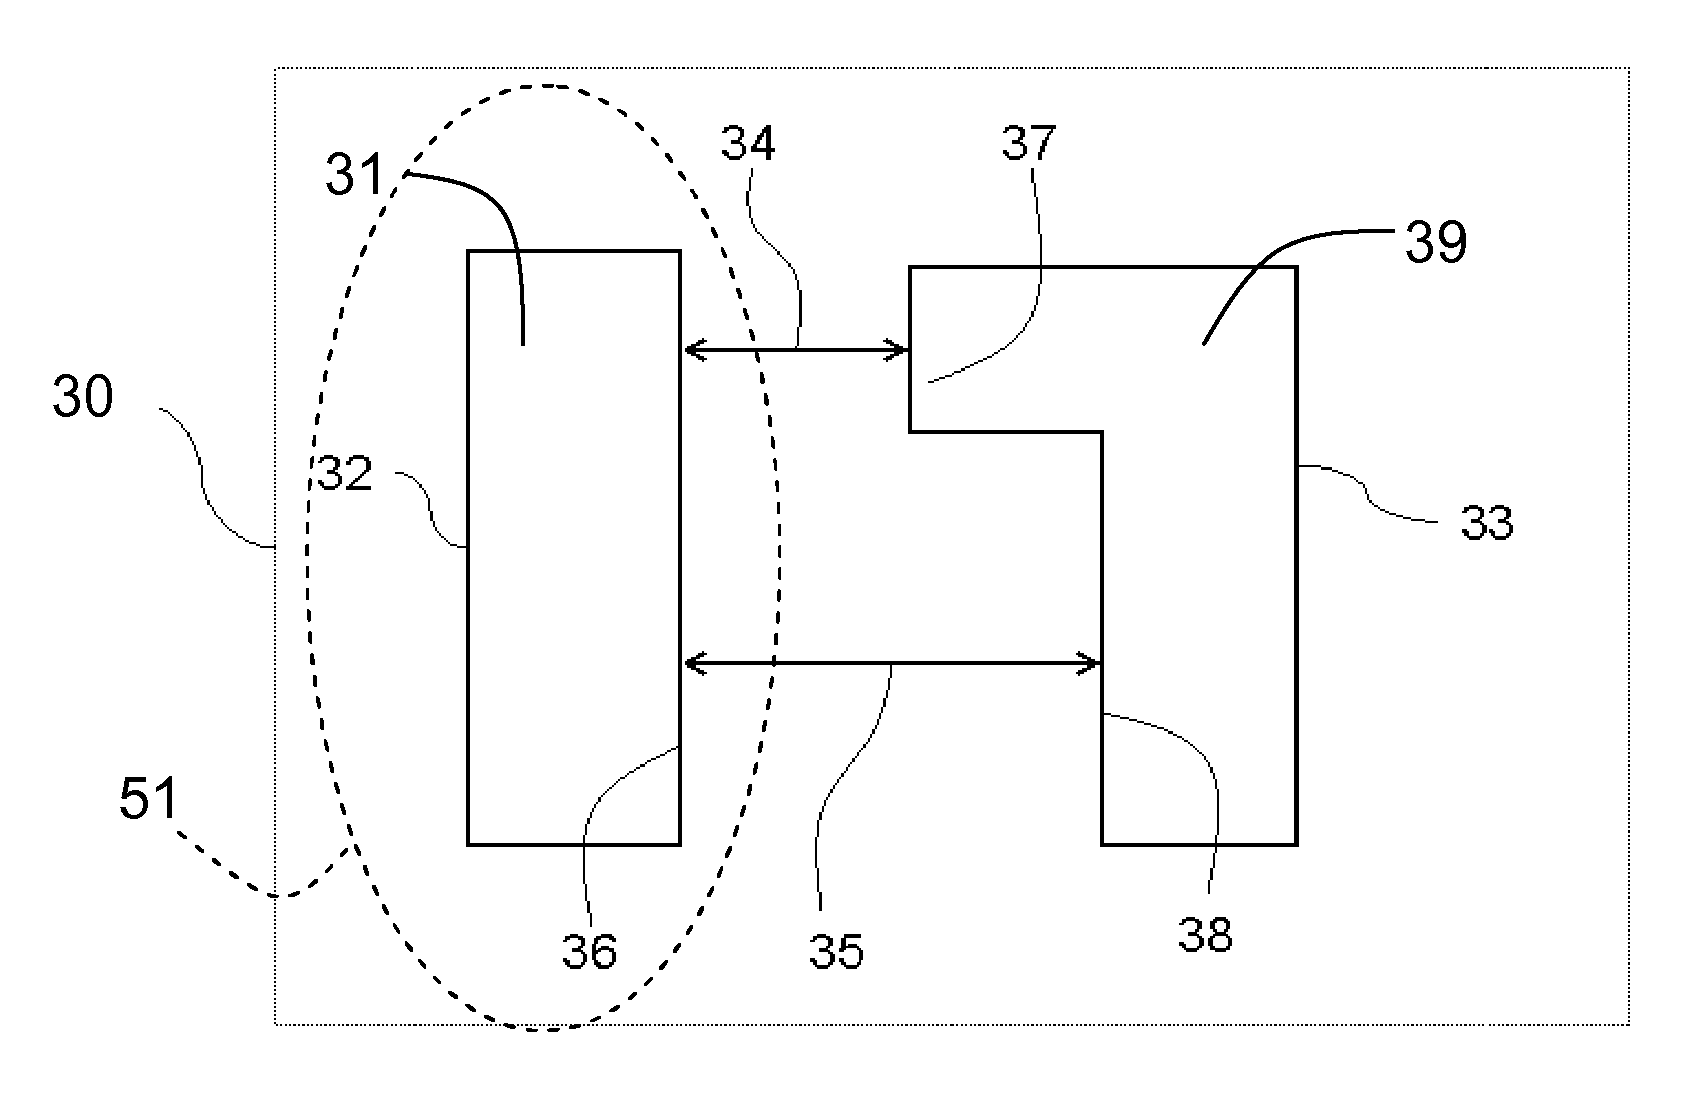 Layout modification engine for modifying a circuit layout comprising fixed and free layout entities